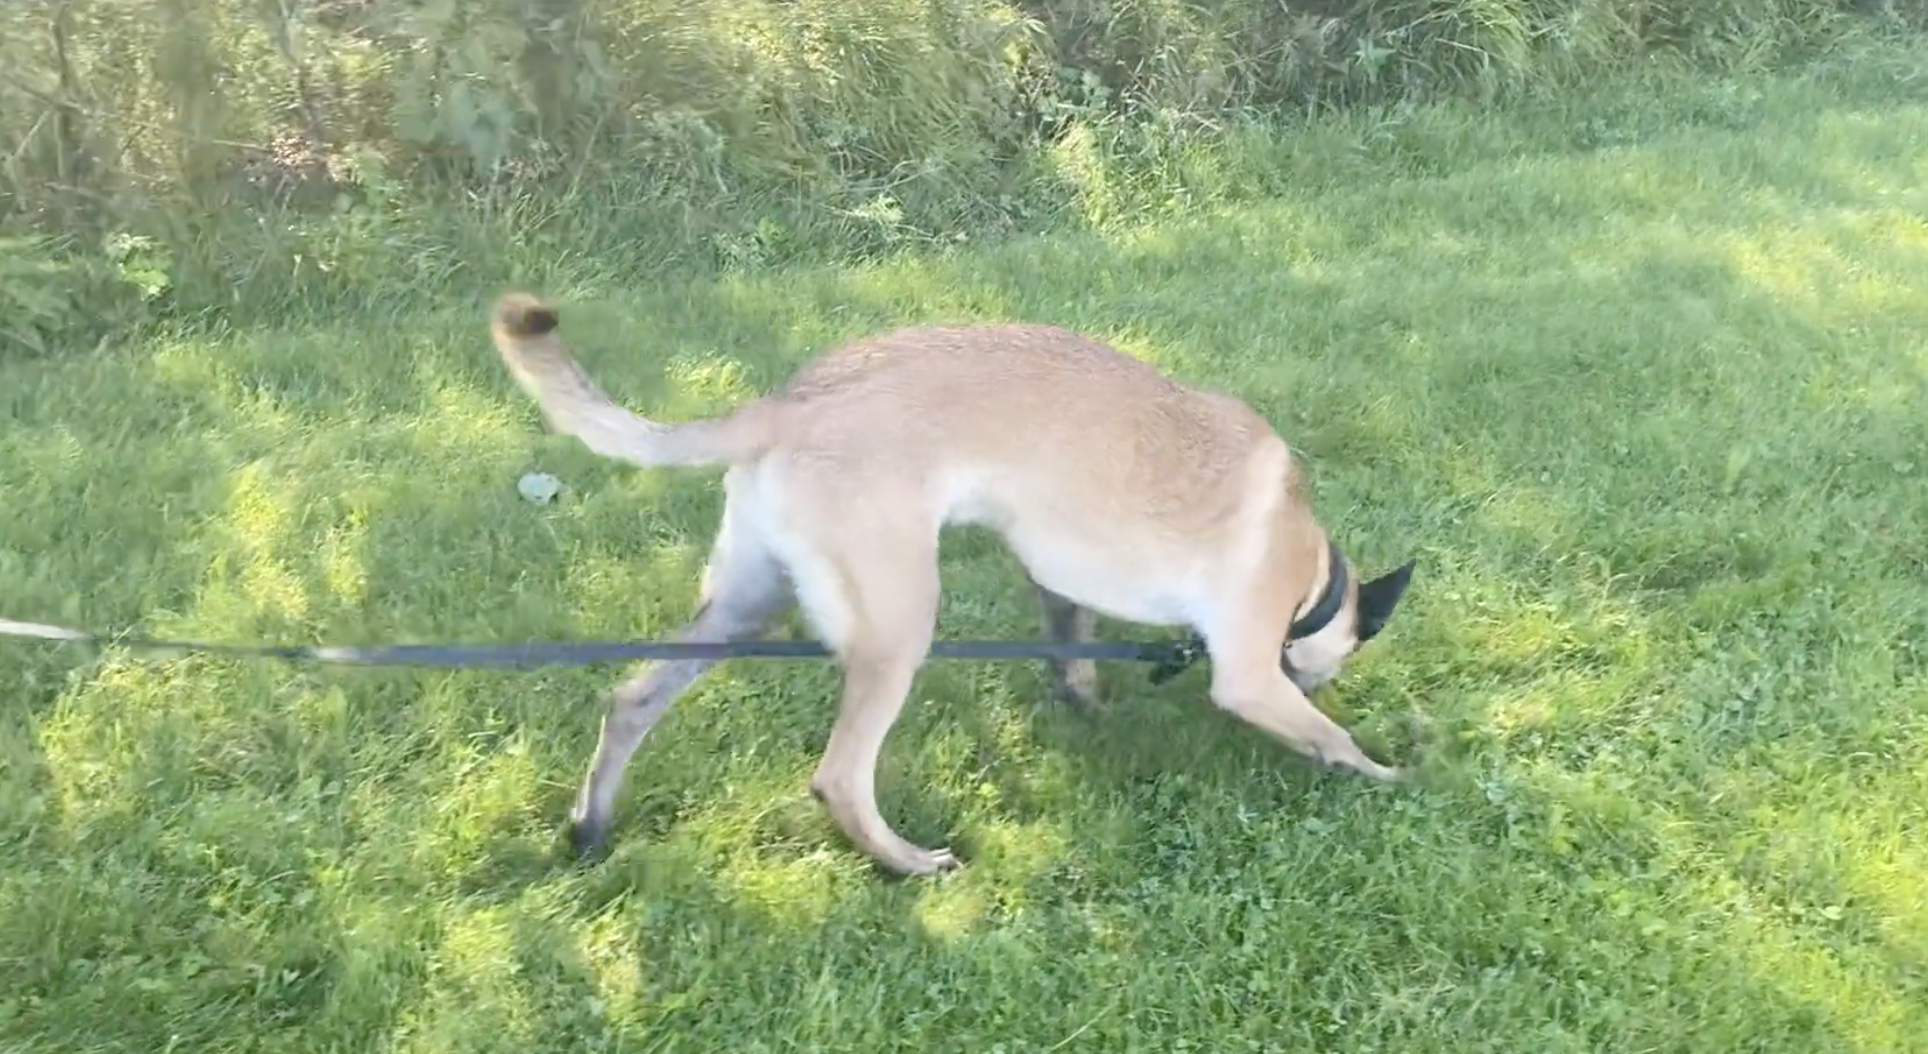 malinois puppy is tracking